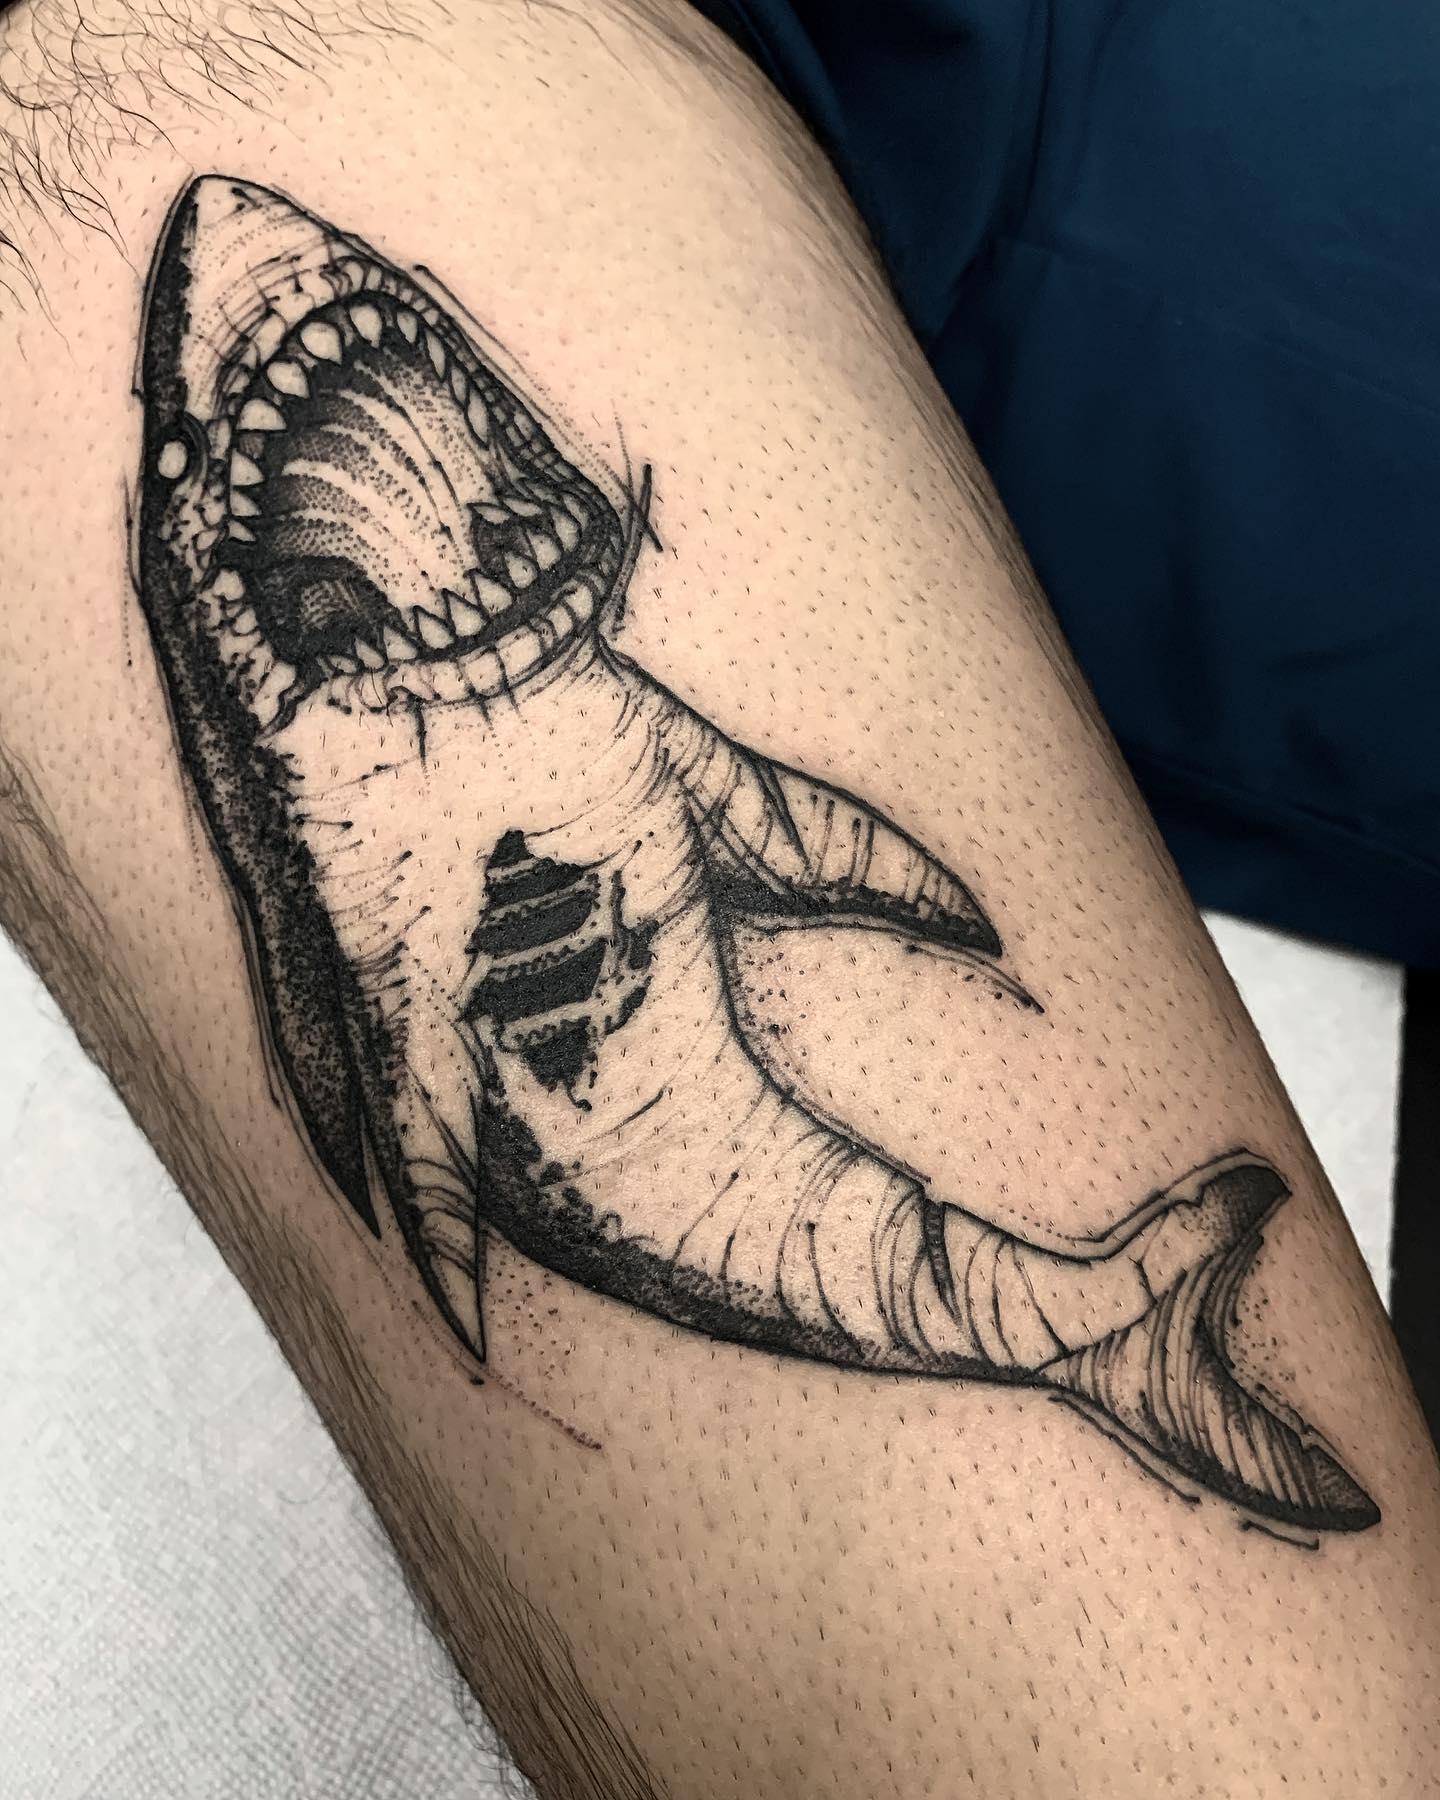 55 Wonderful Shark Tattoo Designs with Meaning